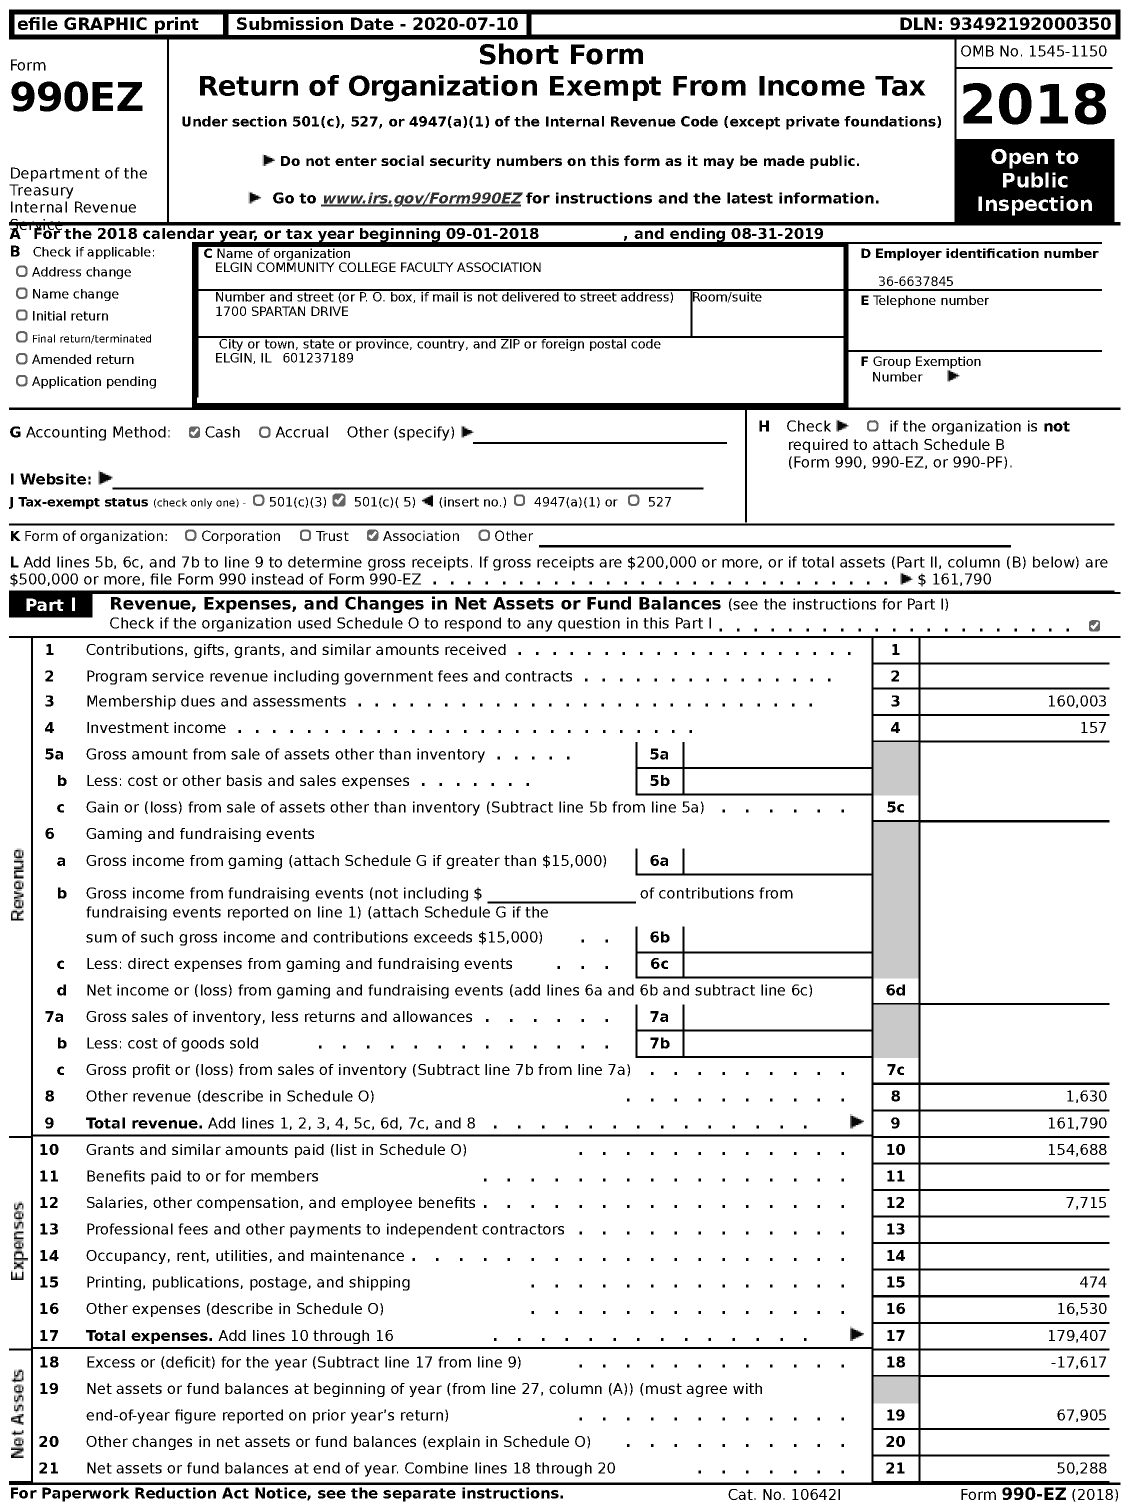 Image of first page of 2018 Form 990EZ for American Federation of Teachers - 3791 Elgin Community College Faculty